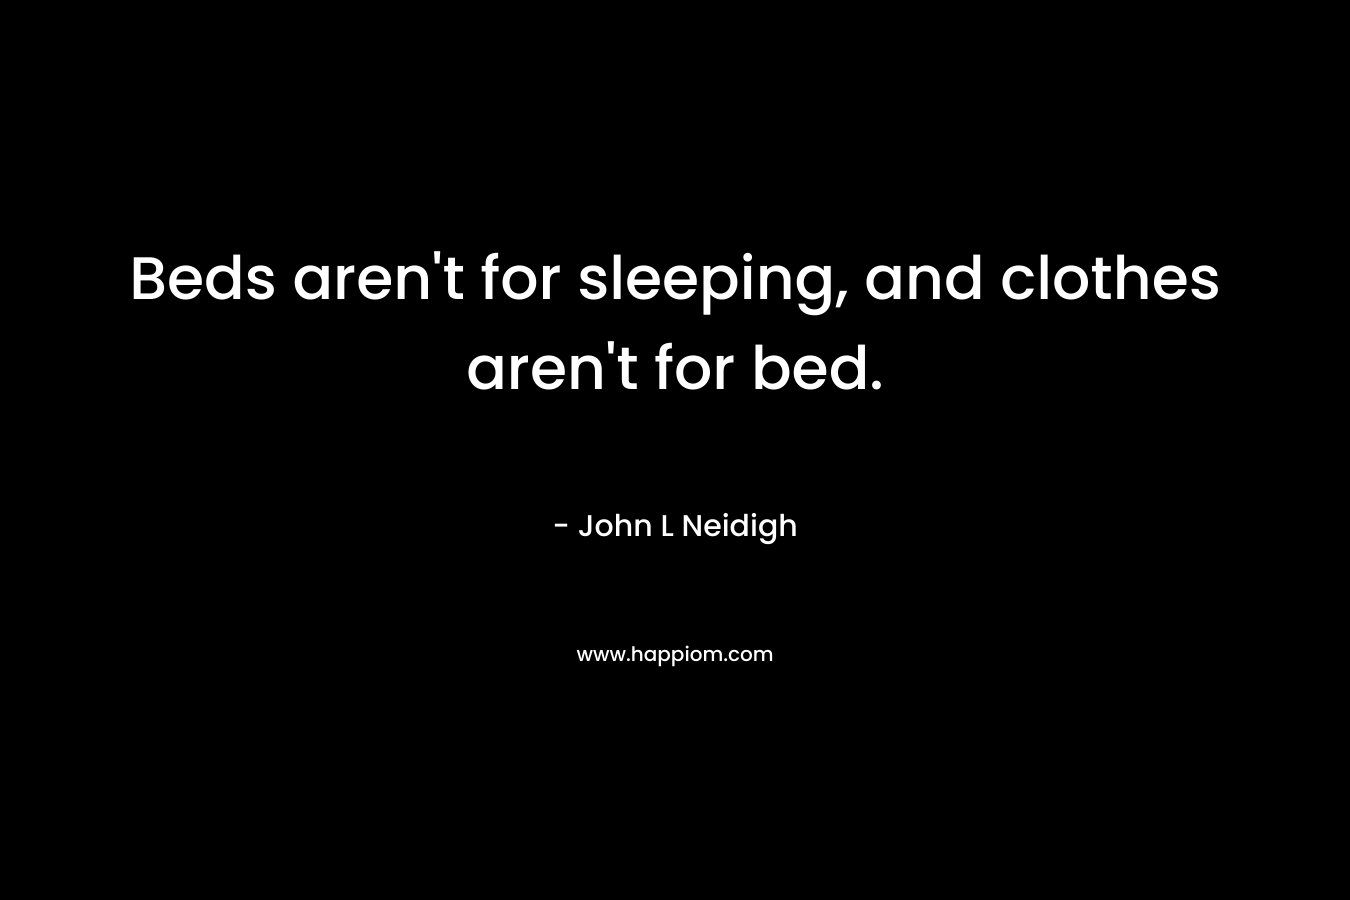 Beds aren’t for sleeping, and clothes aren’t for bed. – John L Neidigh